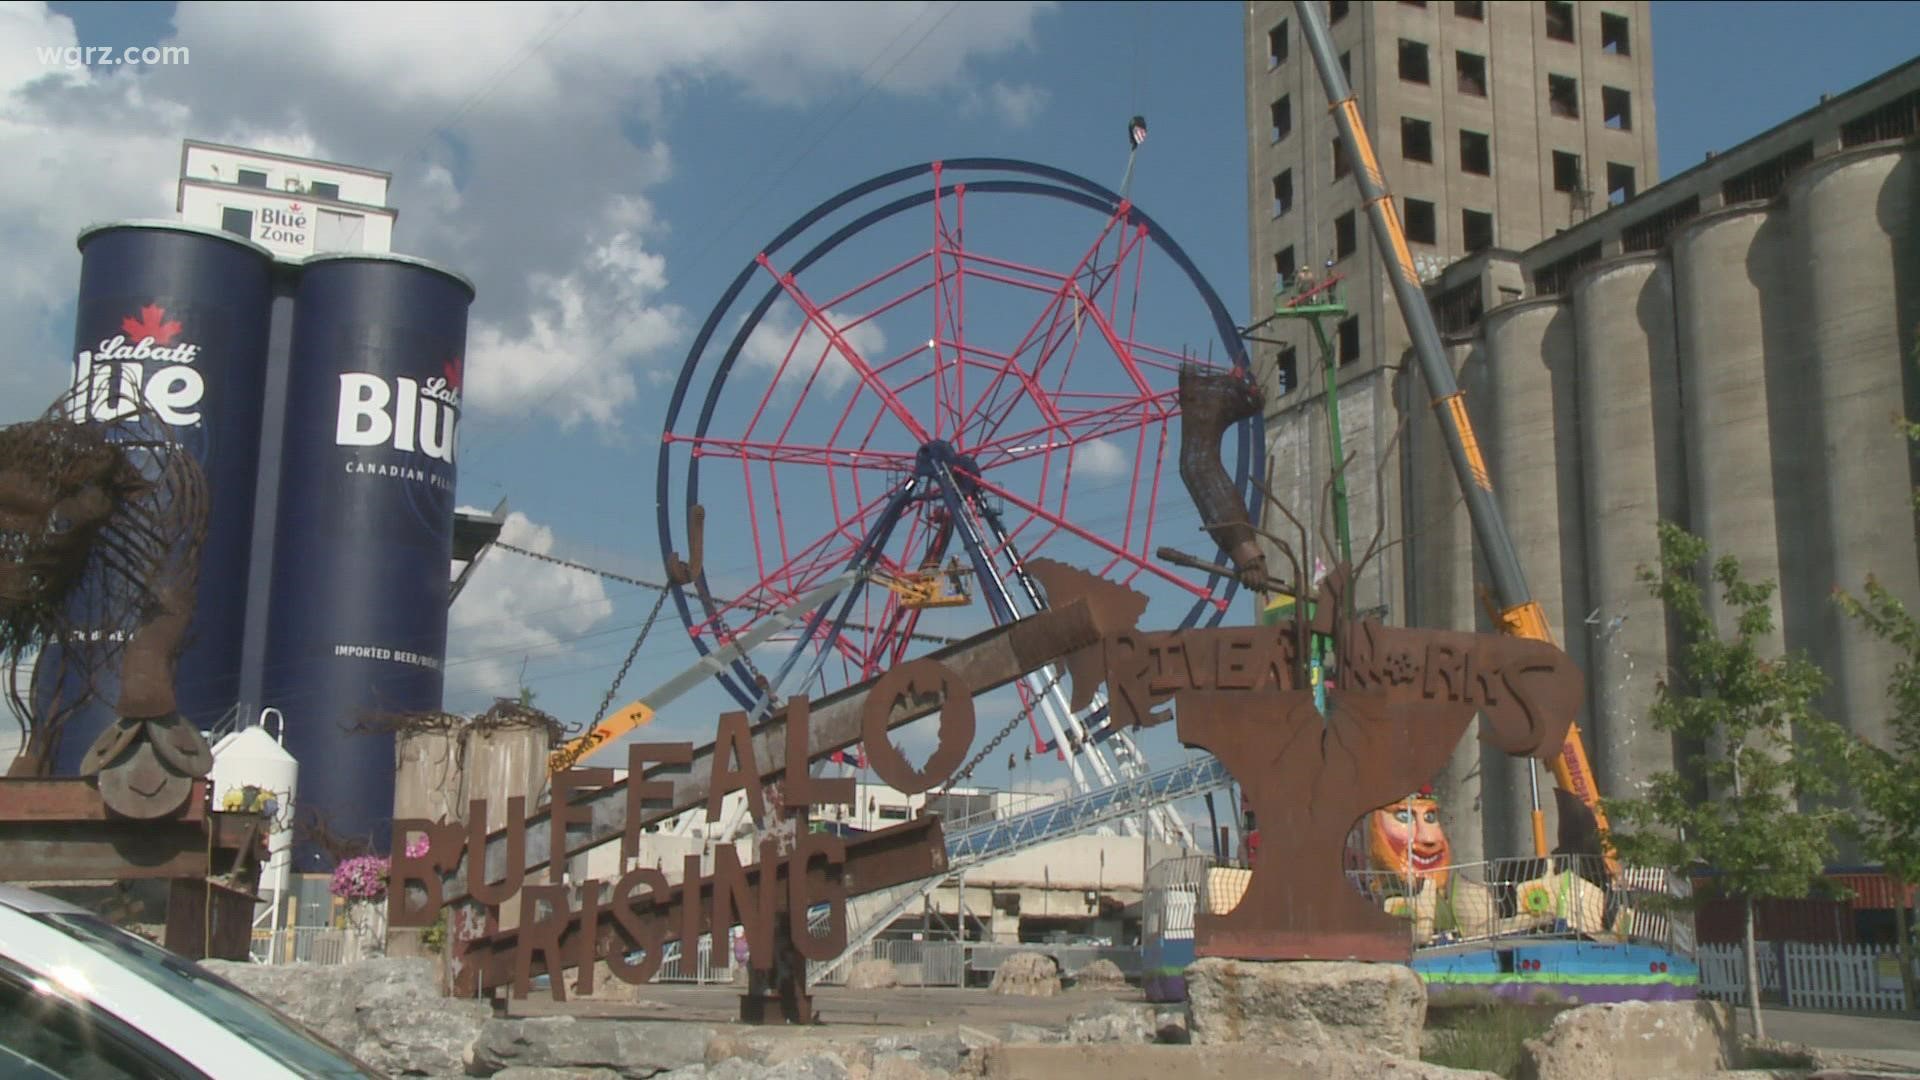 According to a recent Facebook post from Buffalo RiverWorks, the Buffal-O Ferris wheel is nearly complete.